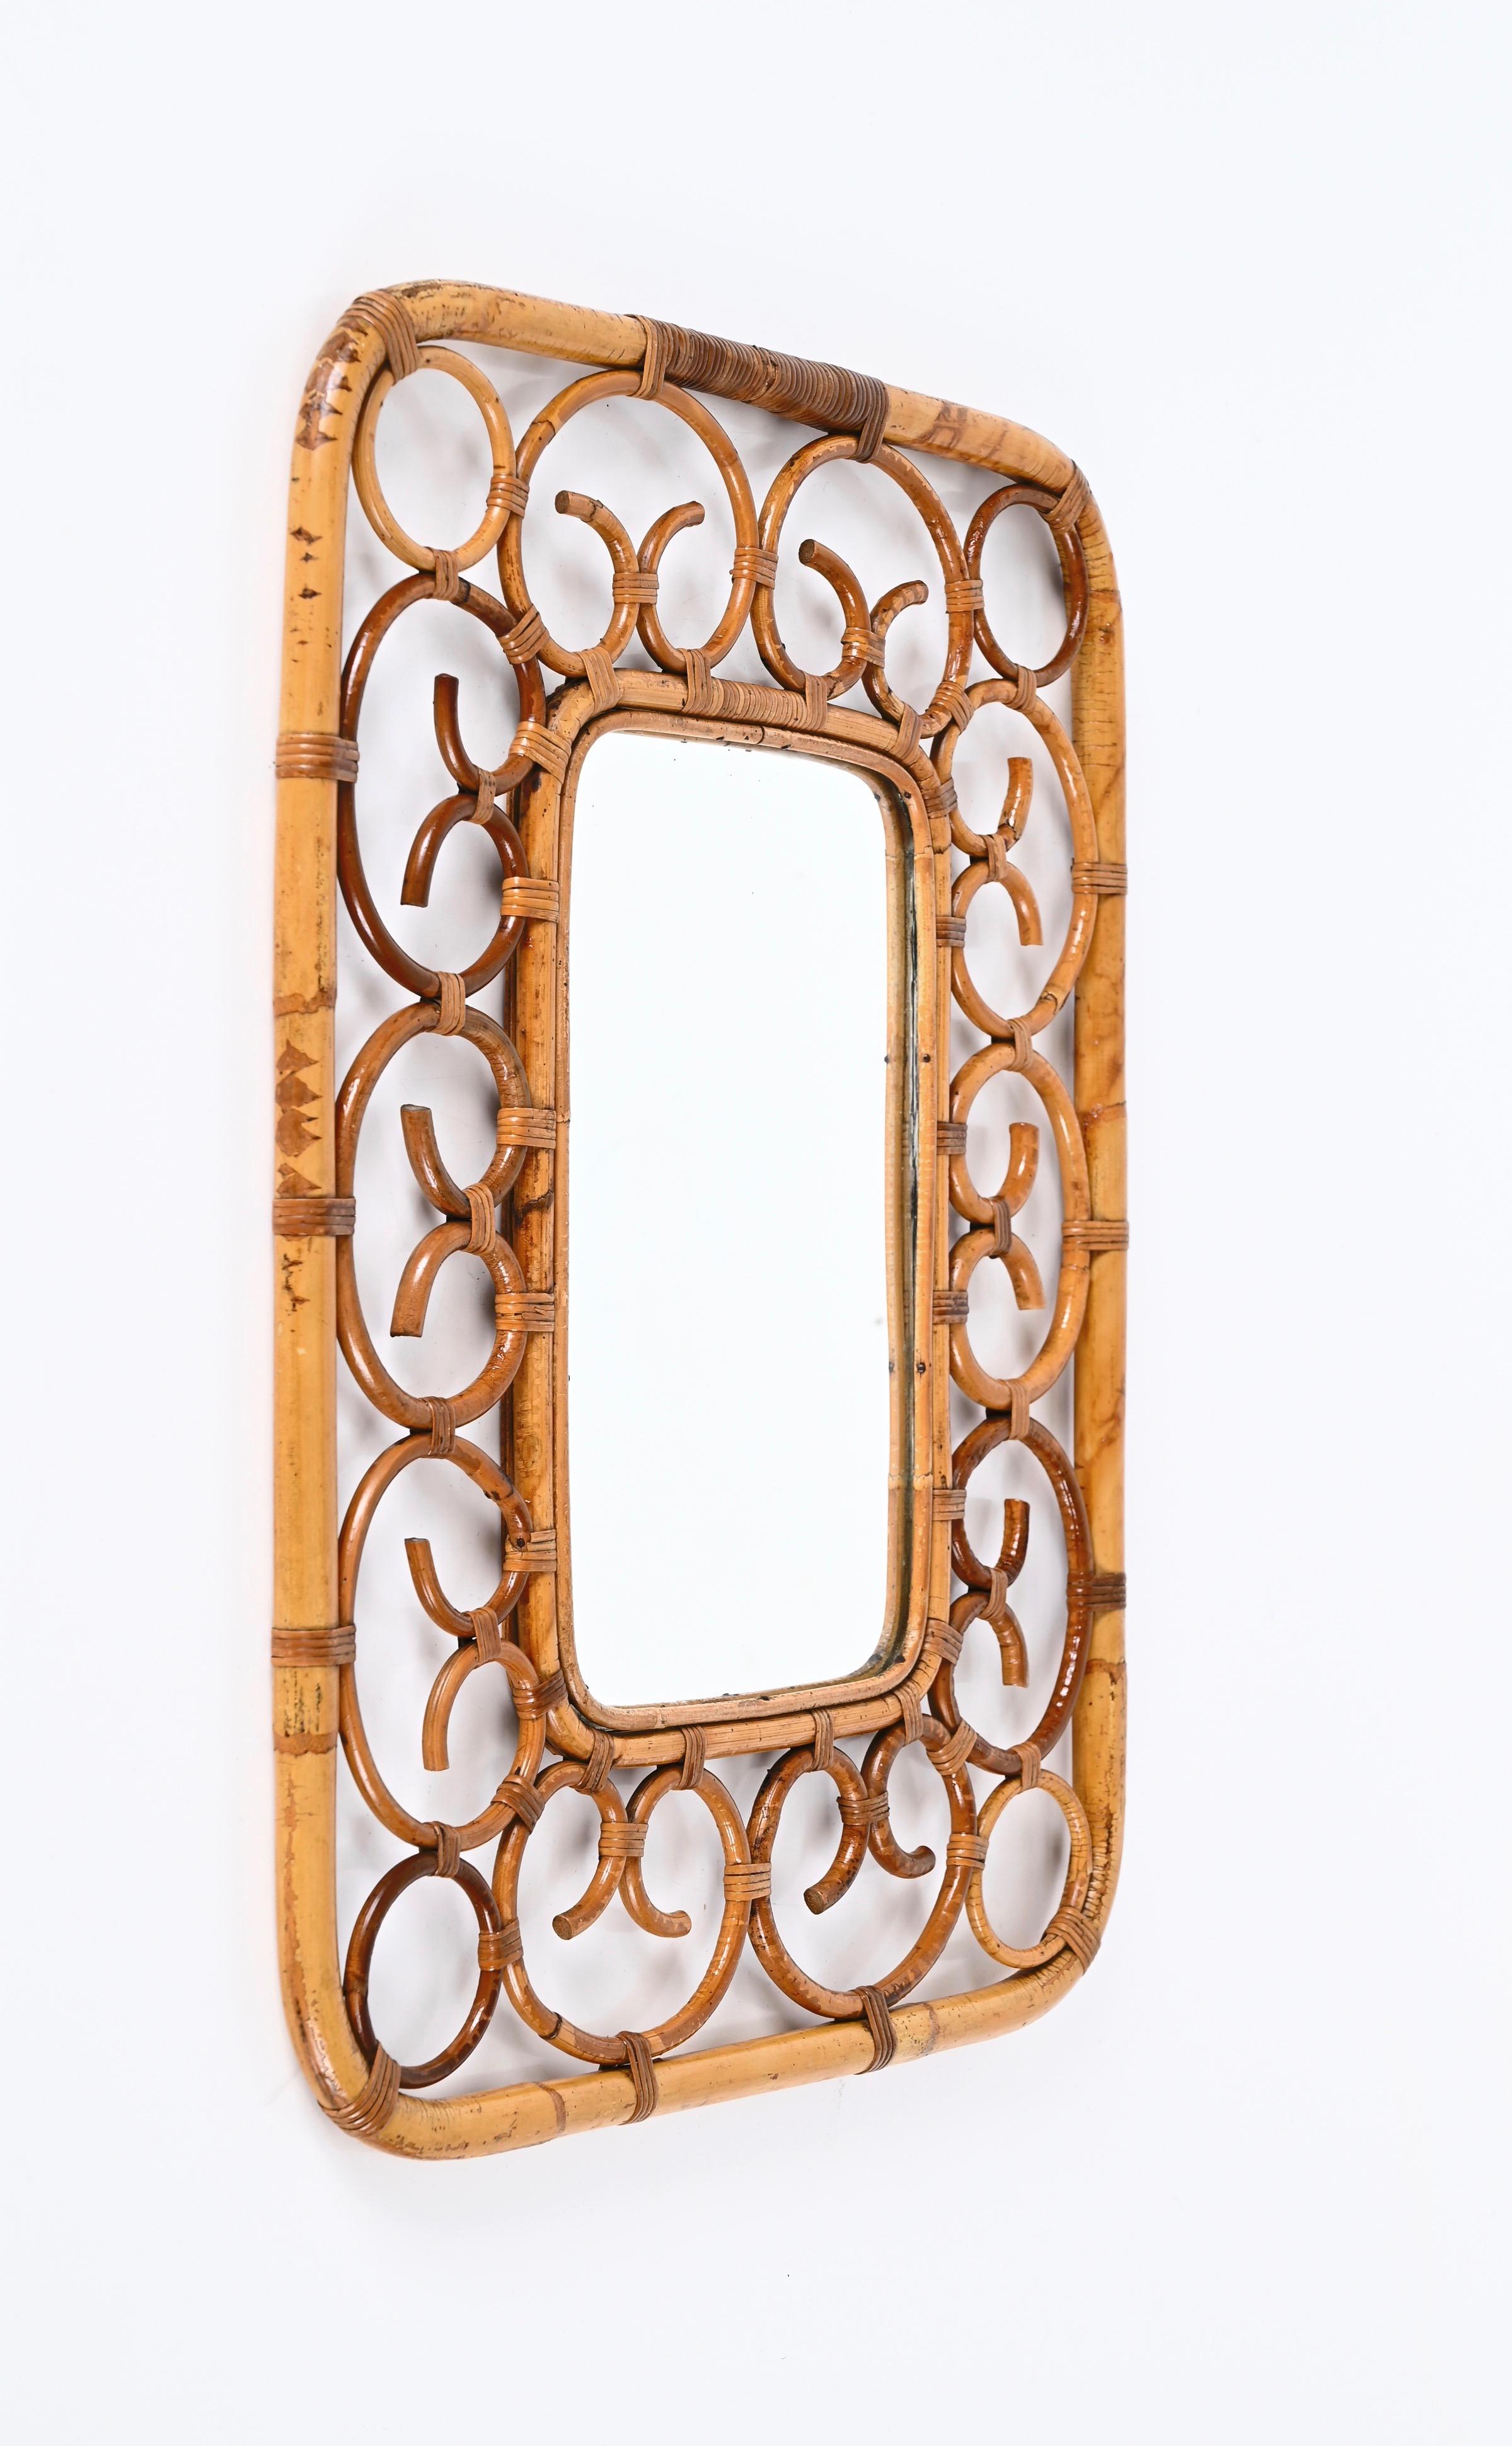 Marvellous Mid-Century rectangular wall mirror in bamboo and rattan. This Cote d'Azur style mirror is attributed to the craftsmanship of Franco Albini and was designed in Italy during the 1960s.

This unique mirror features two rectangular frames in